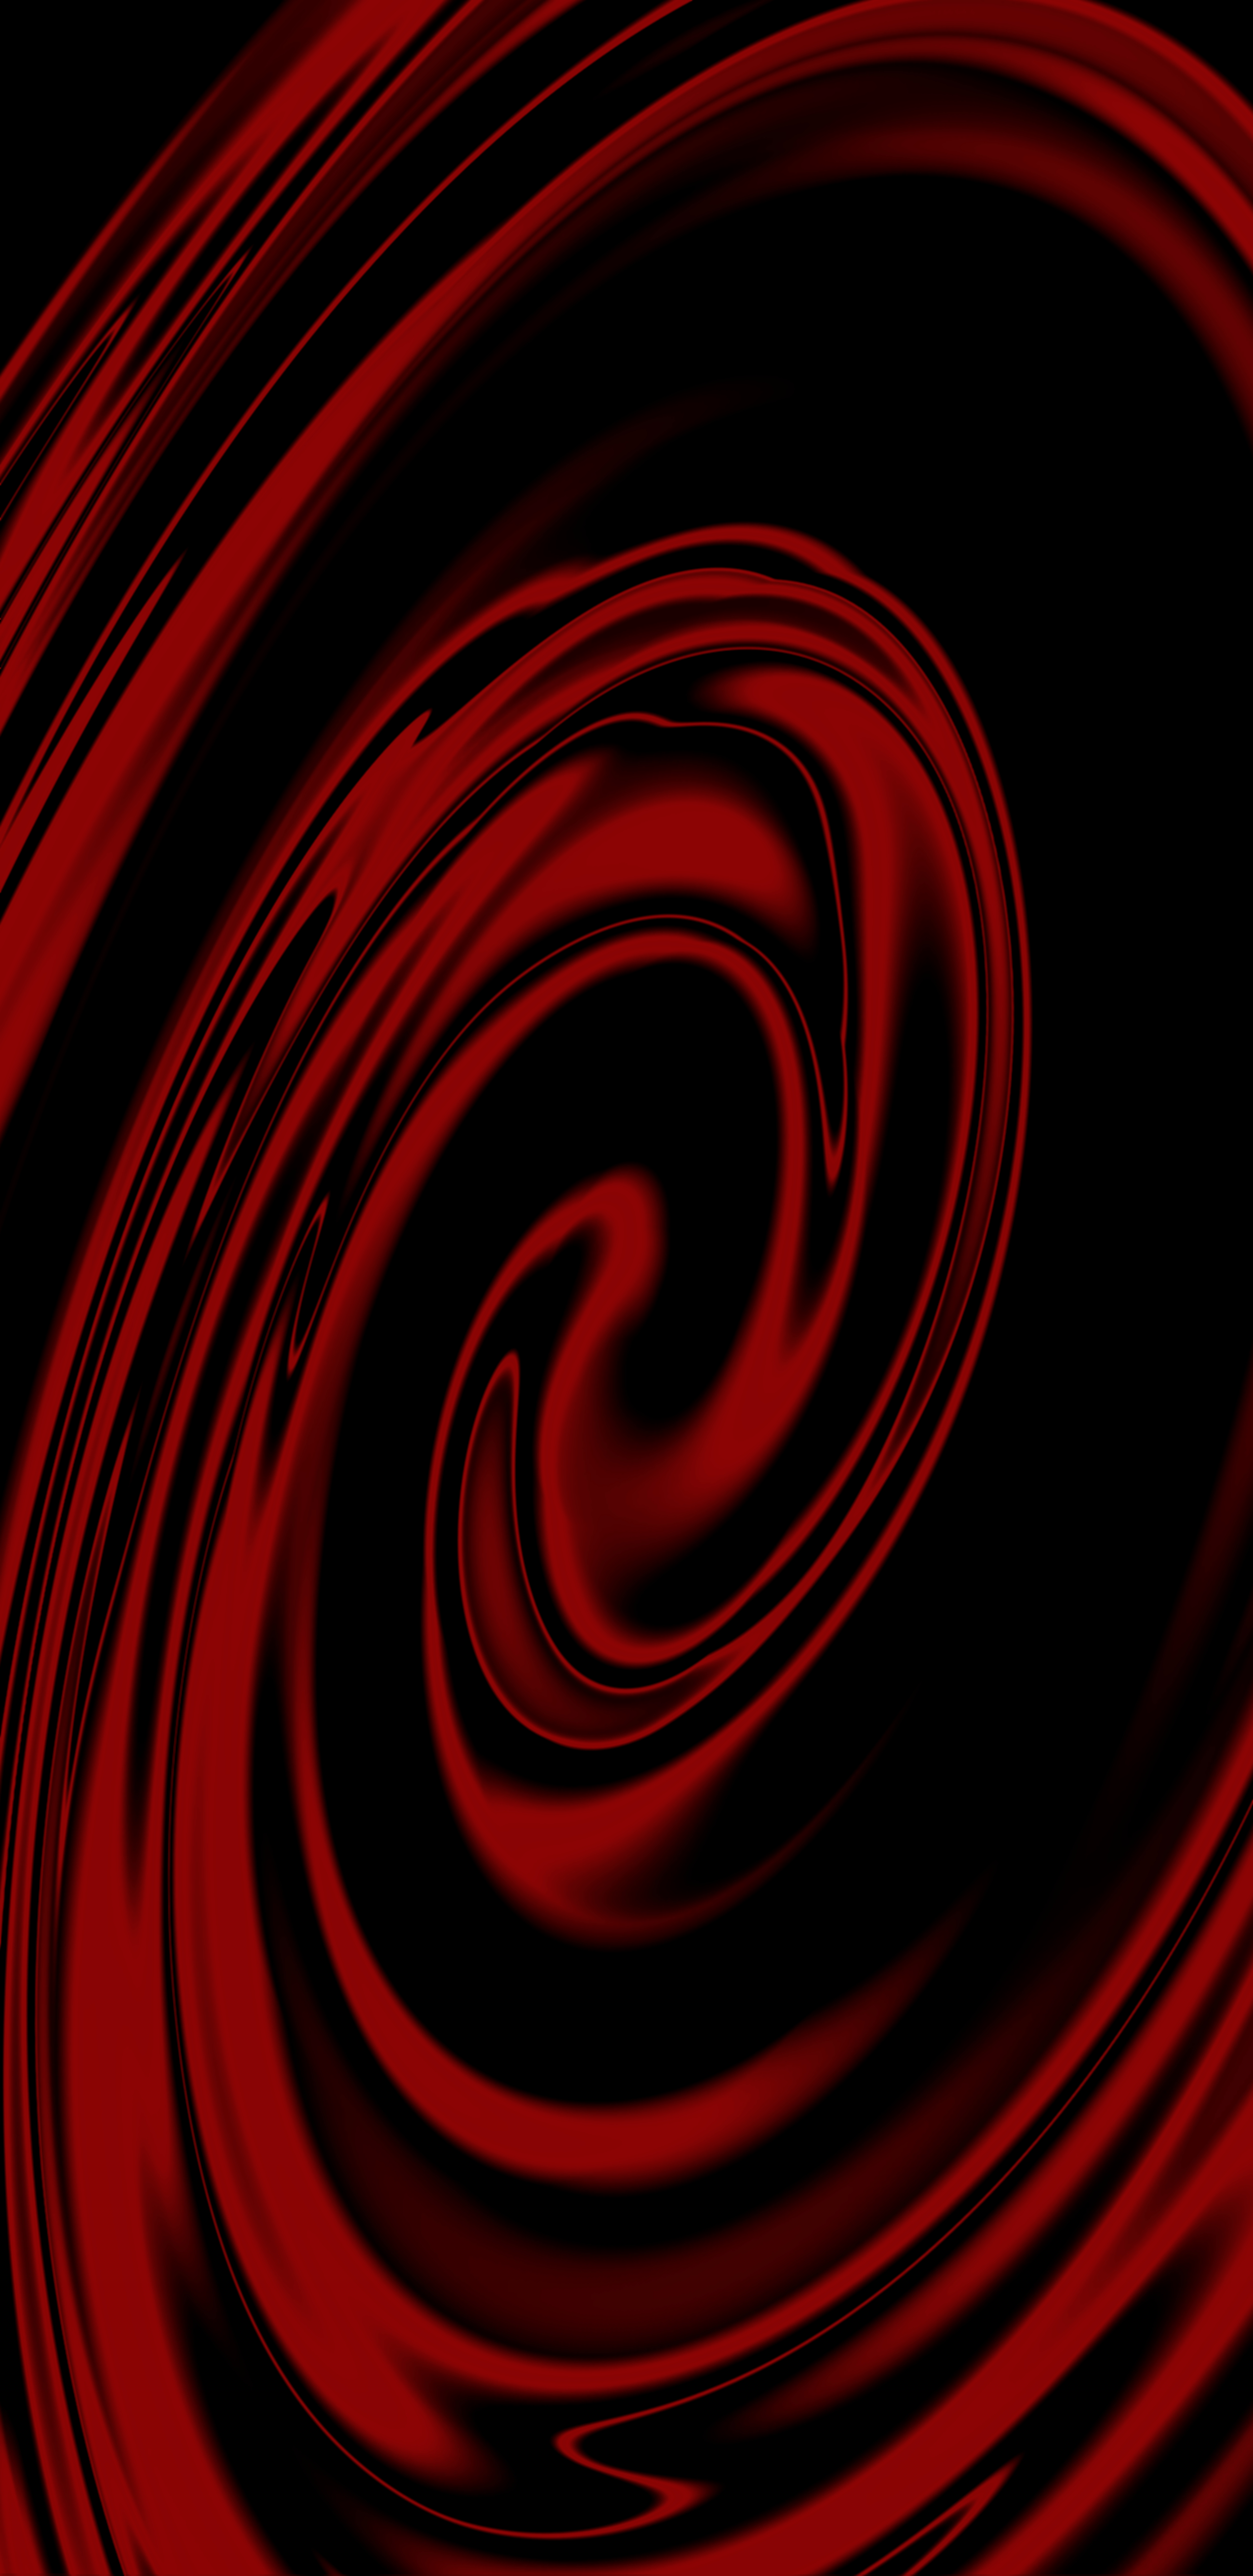 involute, abstract, black, red, spiral, swirling Full HD